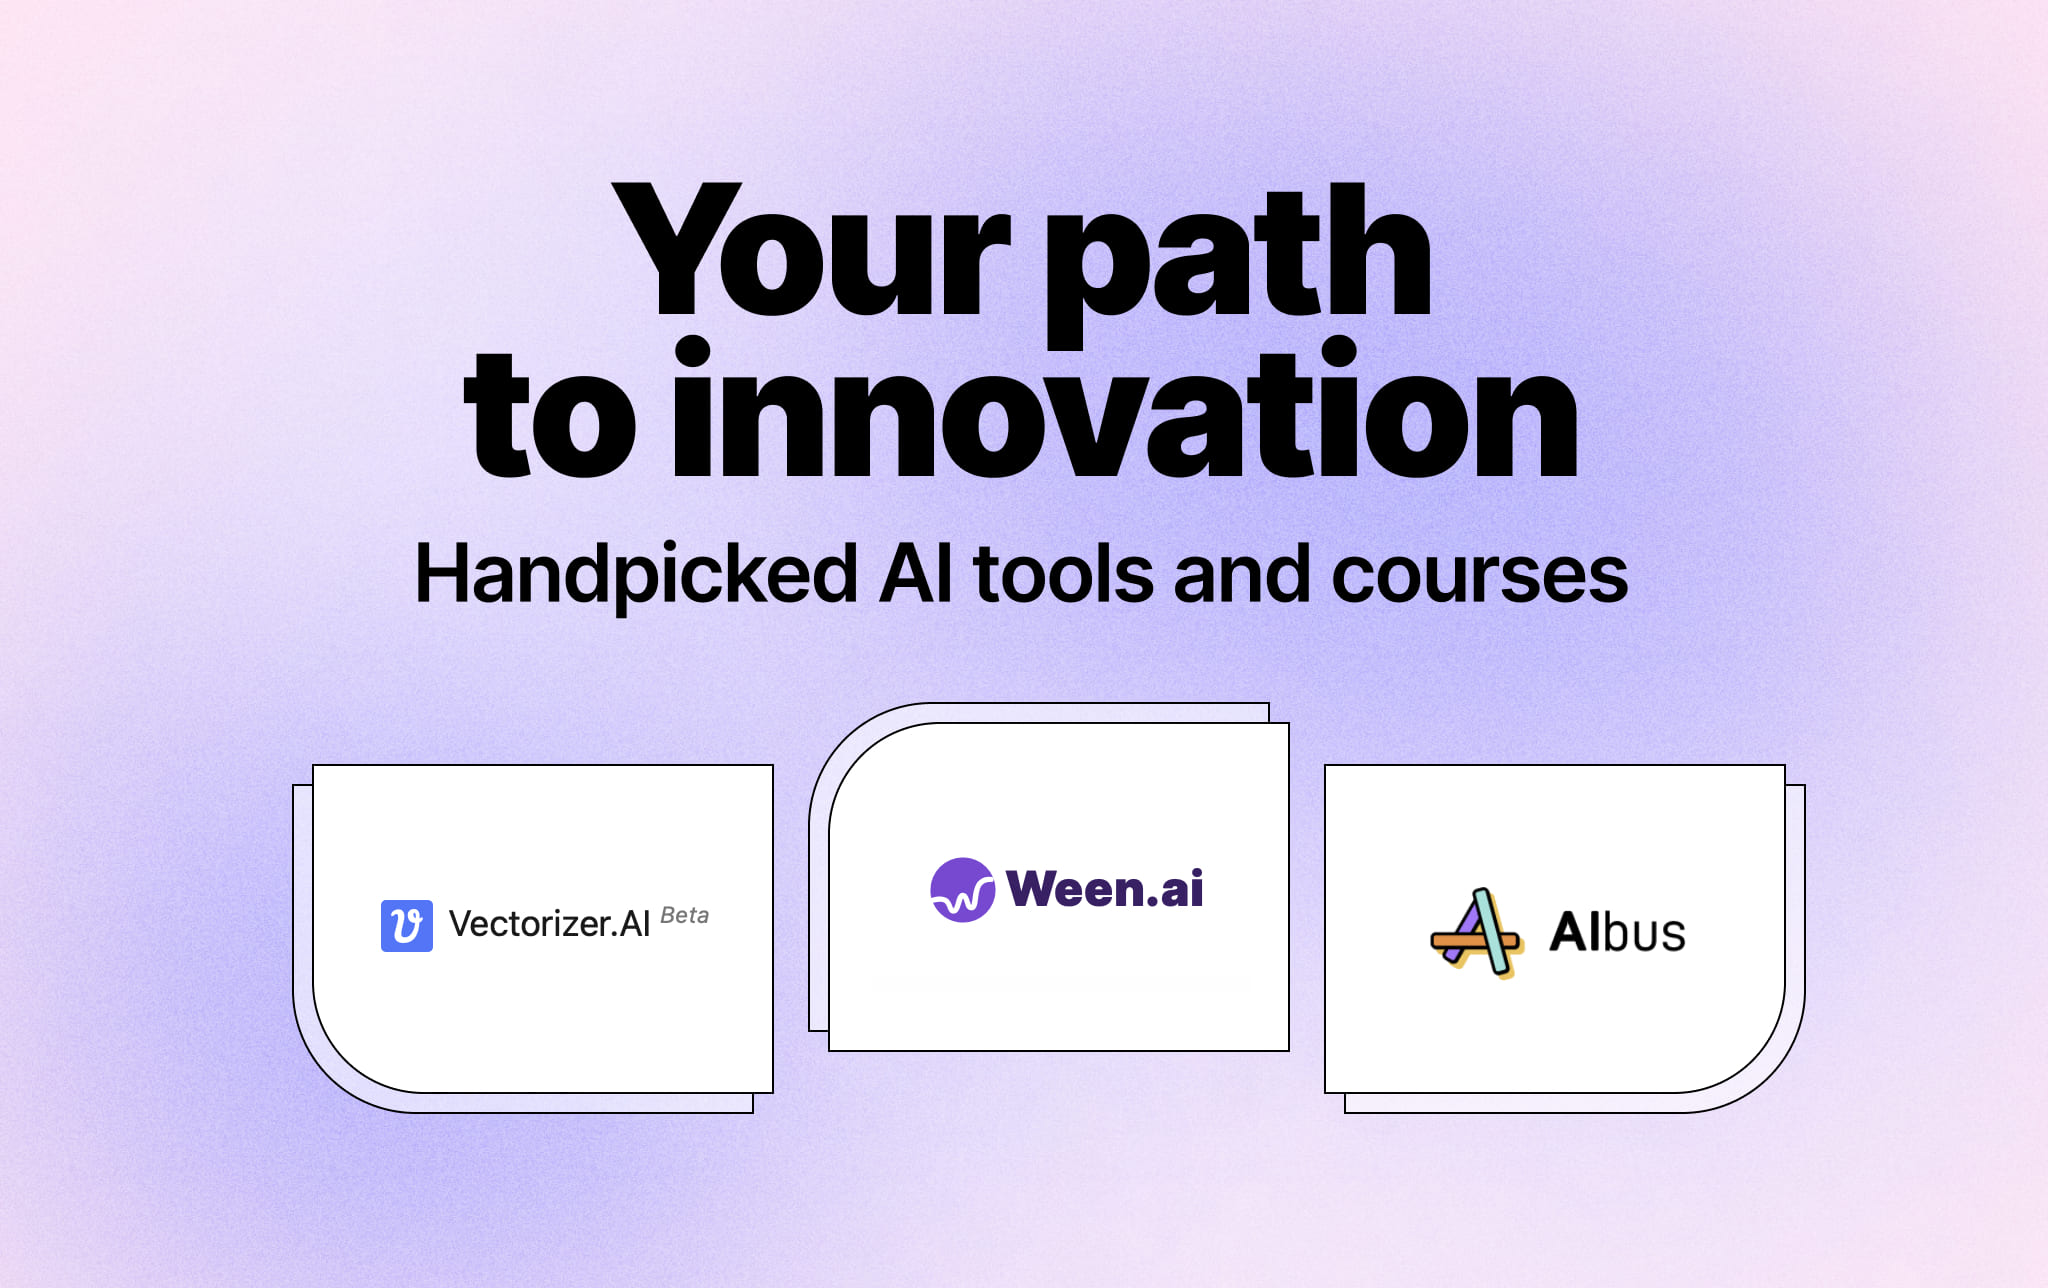 Your path to innovation handpicked AI tools and courses